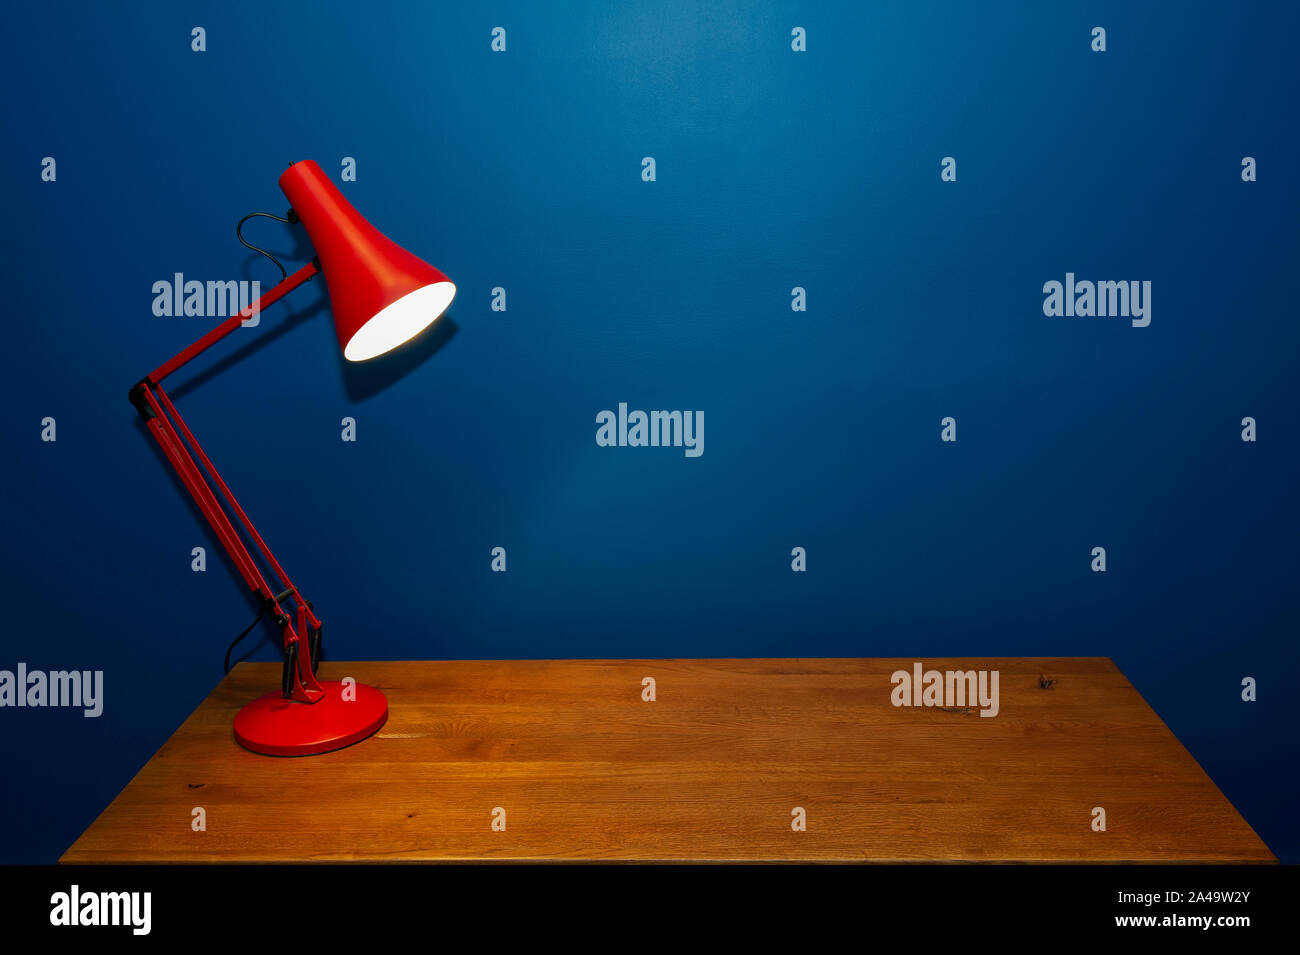 Anglepoise And Lamp Stock Photos Anglepoise And Lamp Stock